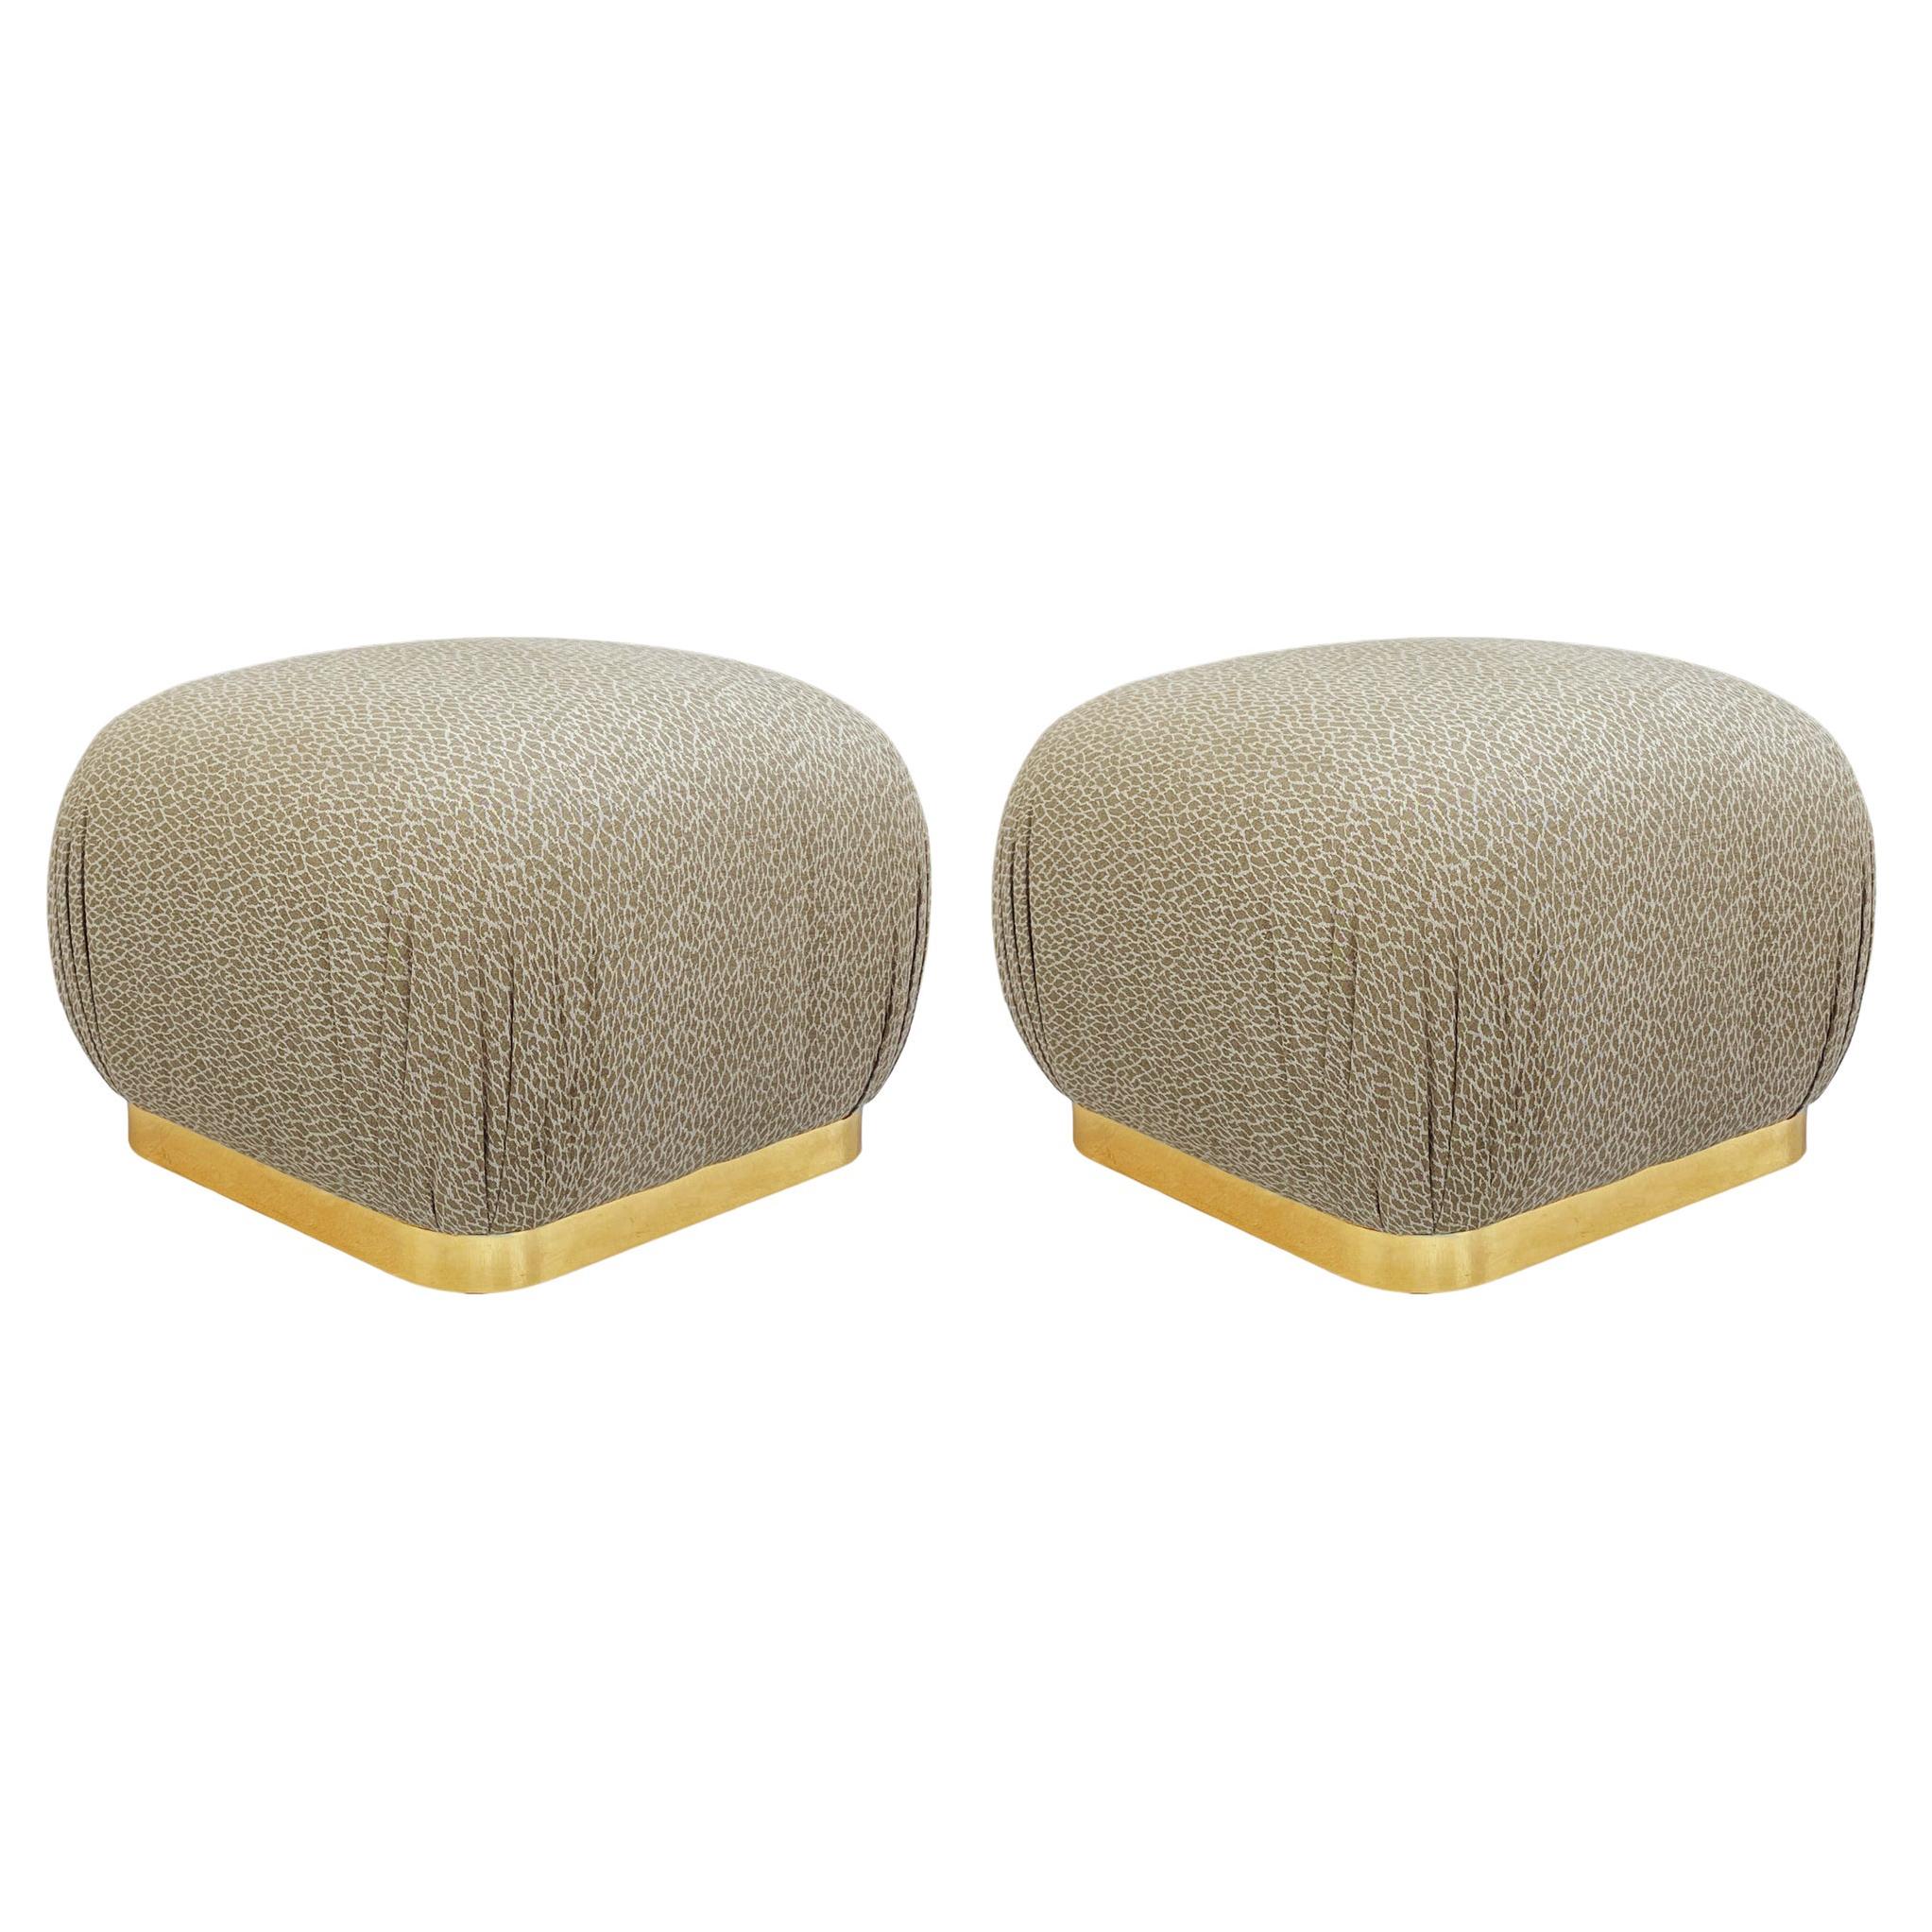 Pair of Hollywood Regency Poufs or Ottomans after Karl Springer by Weiman